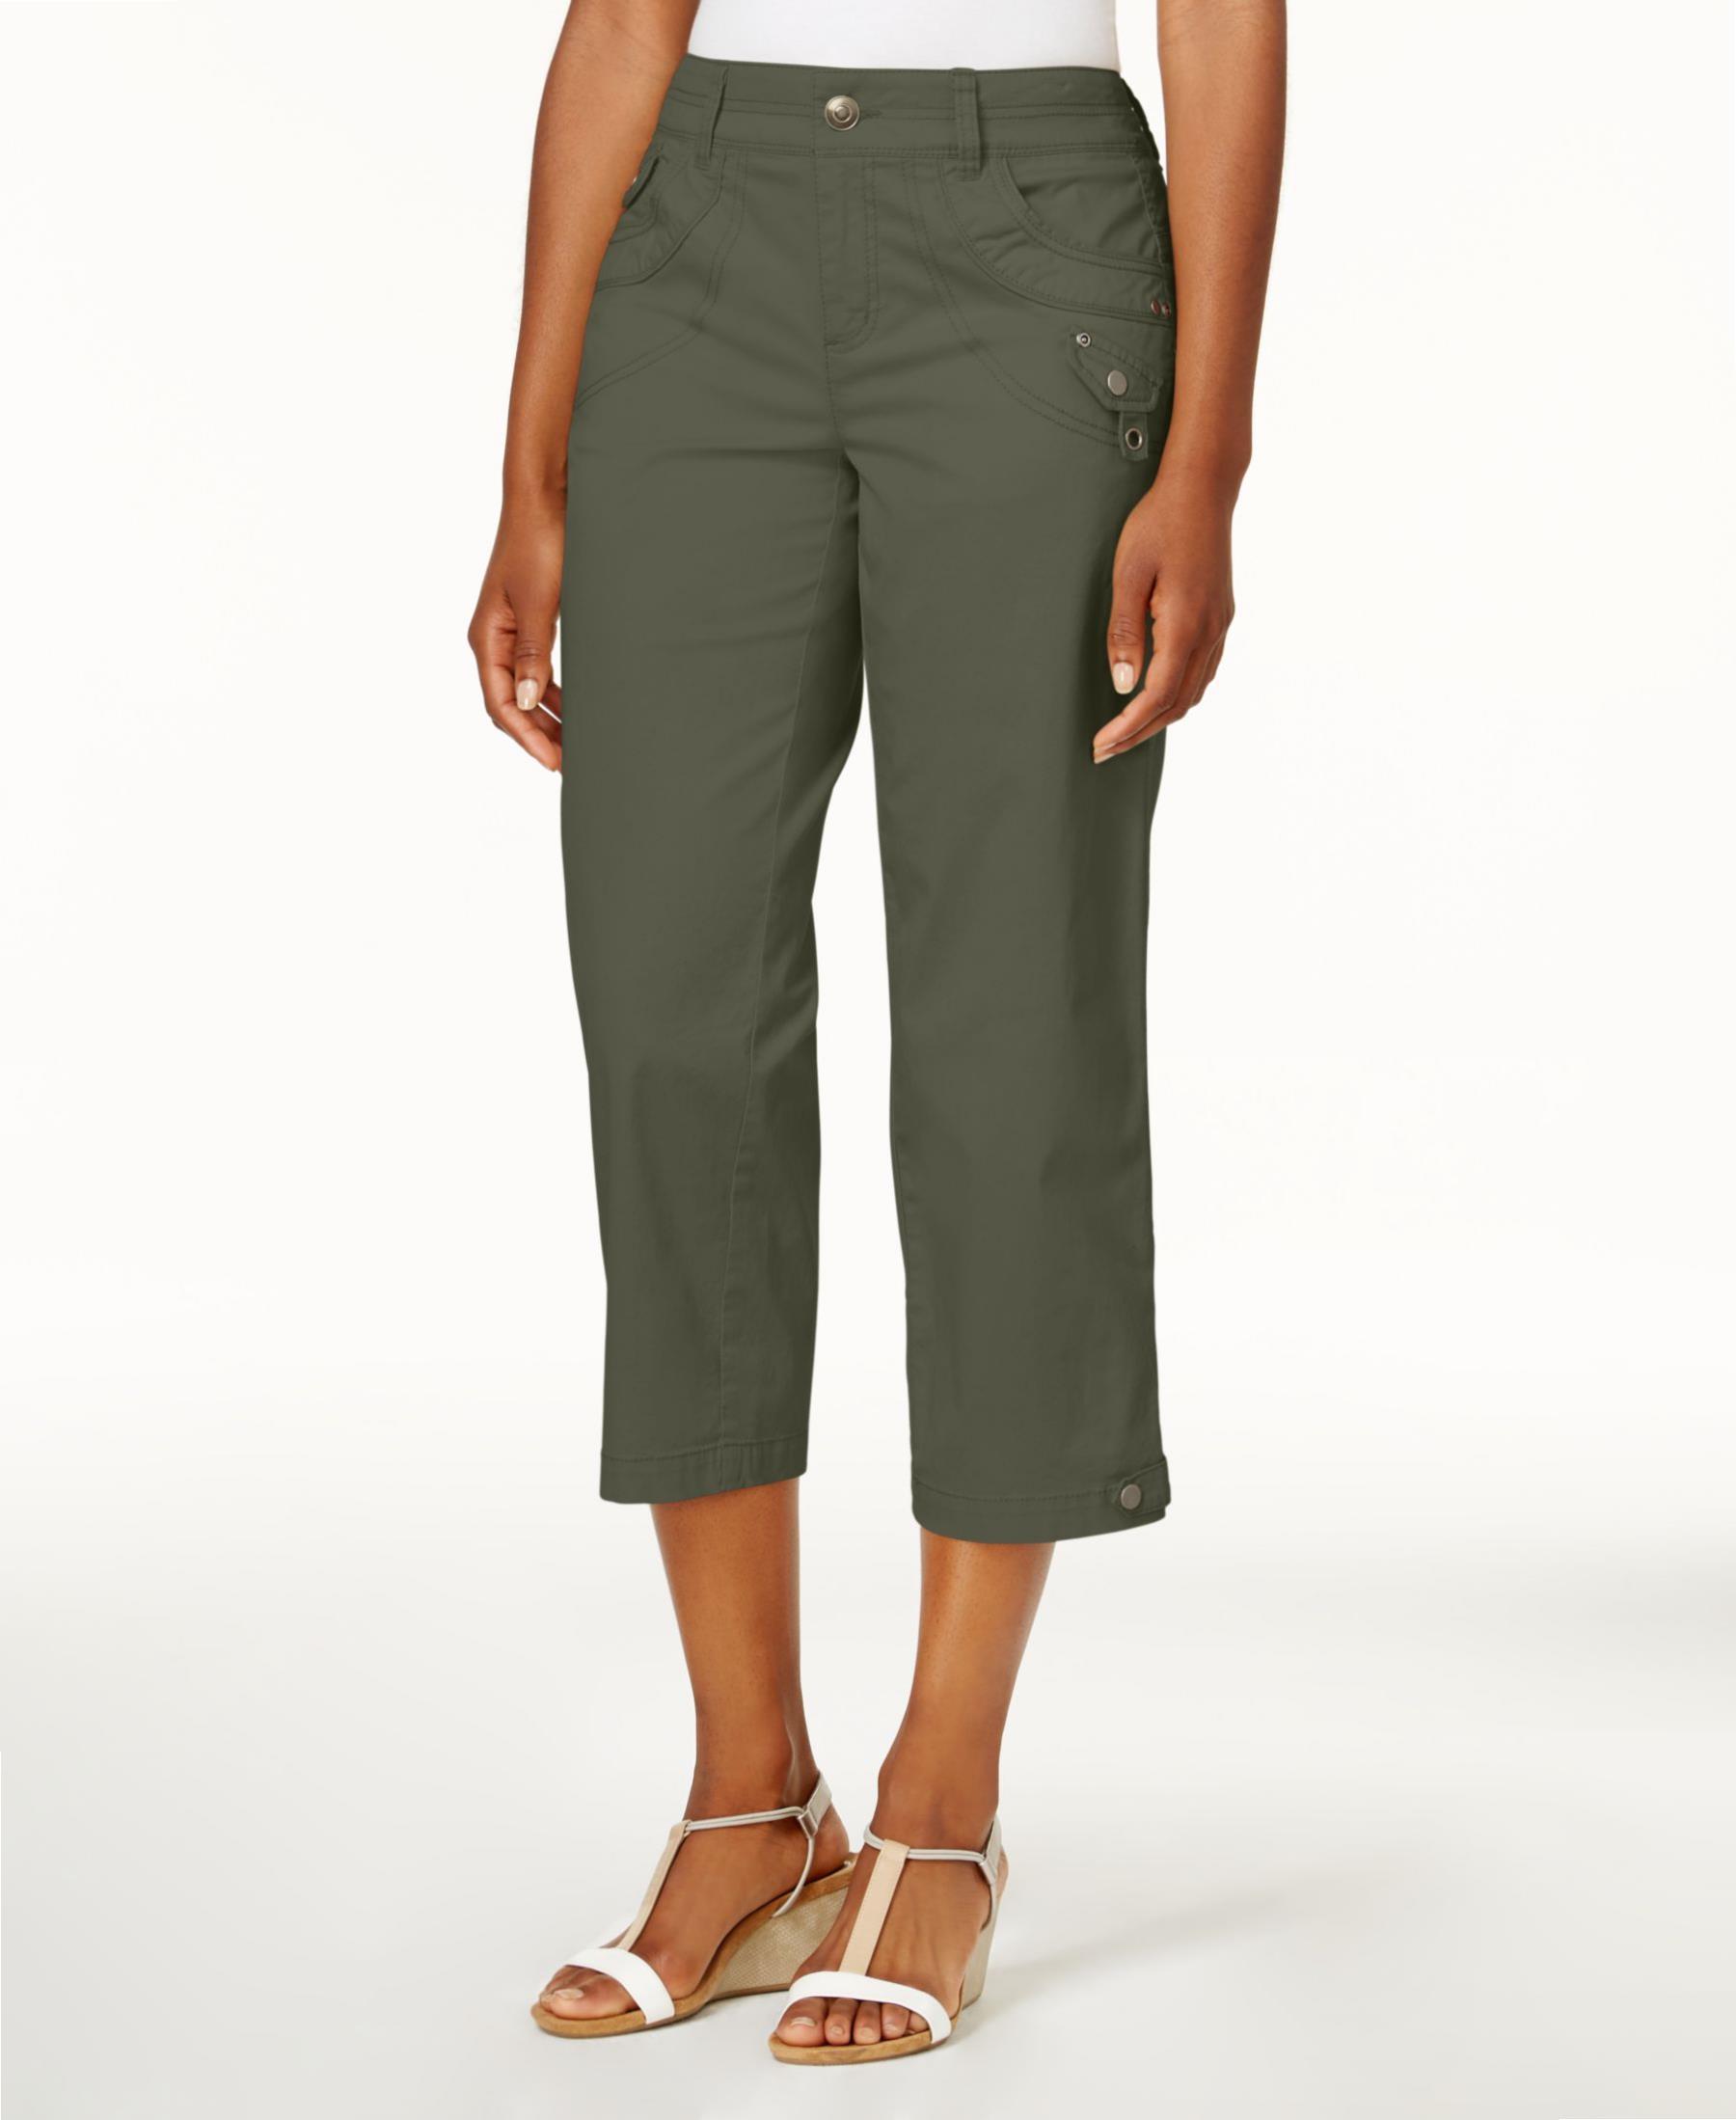 Style & Co. Women Size 4 Green Capris Cropped Pants | Canerra